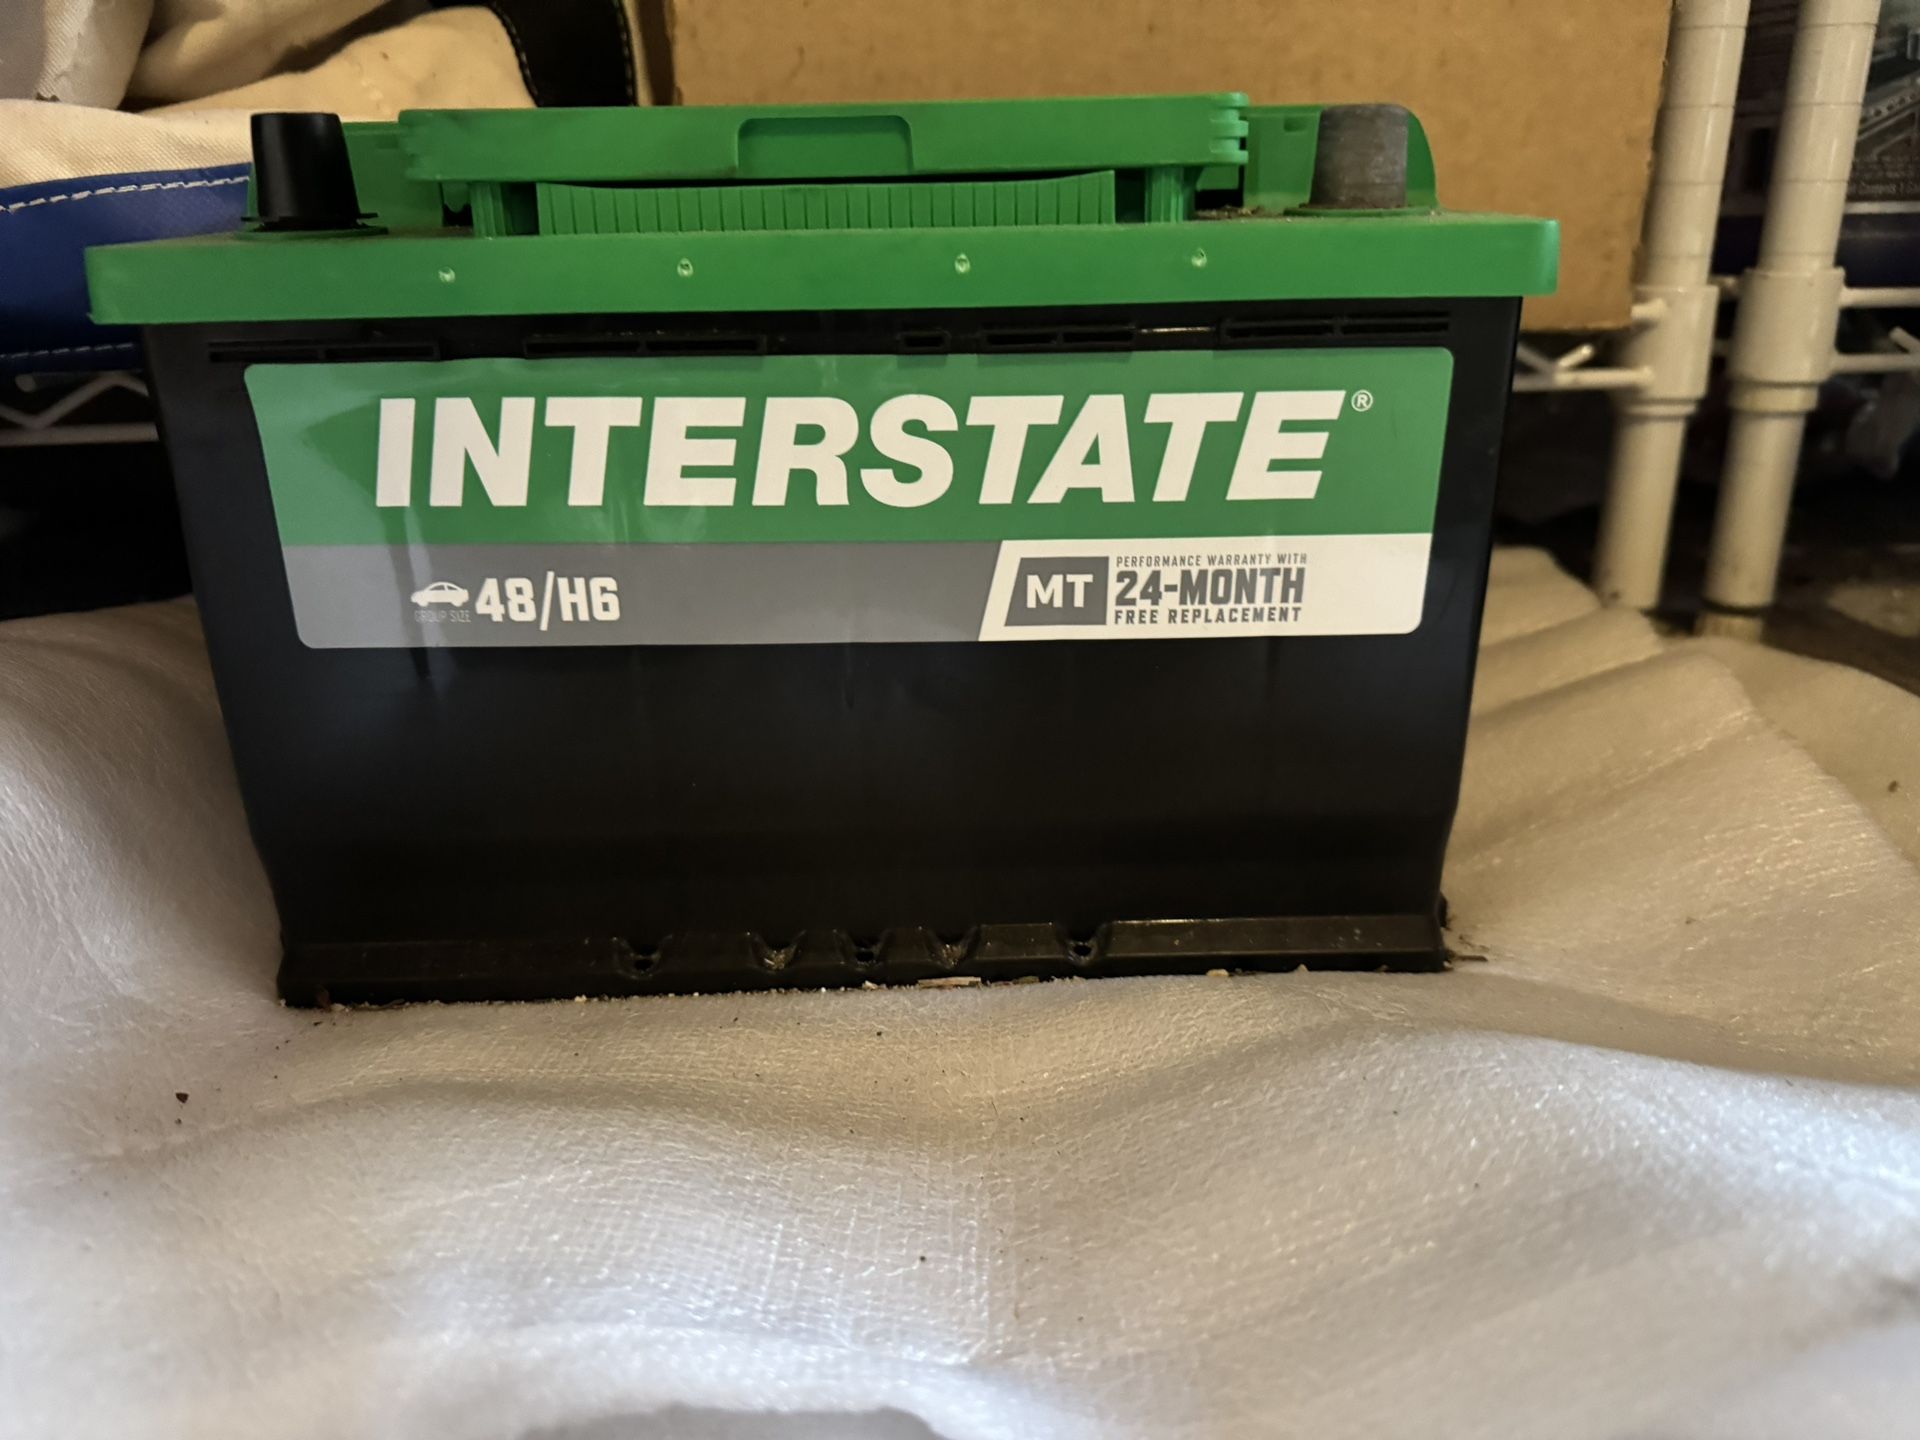 Car battery, INTERSTATE size: MT-48/H6